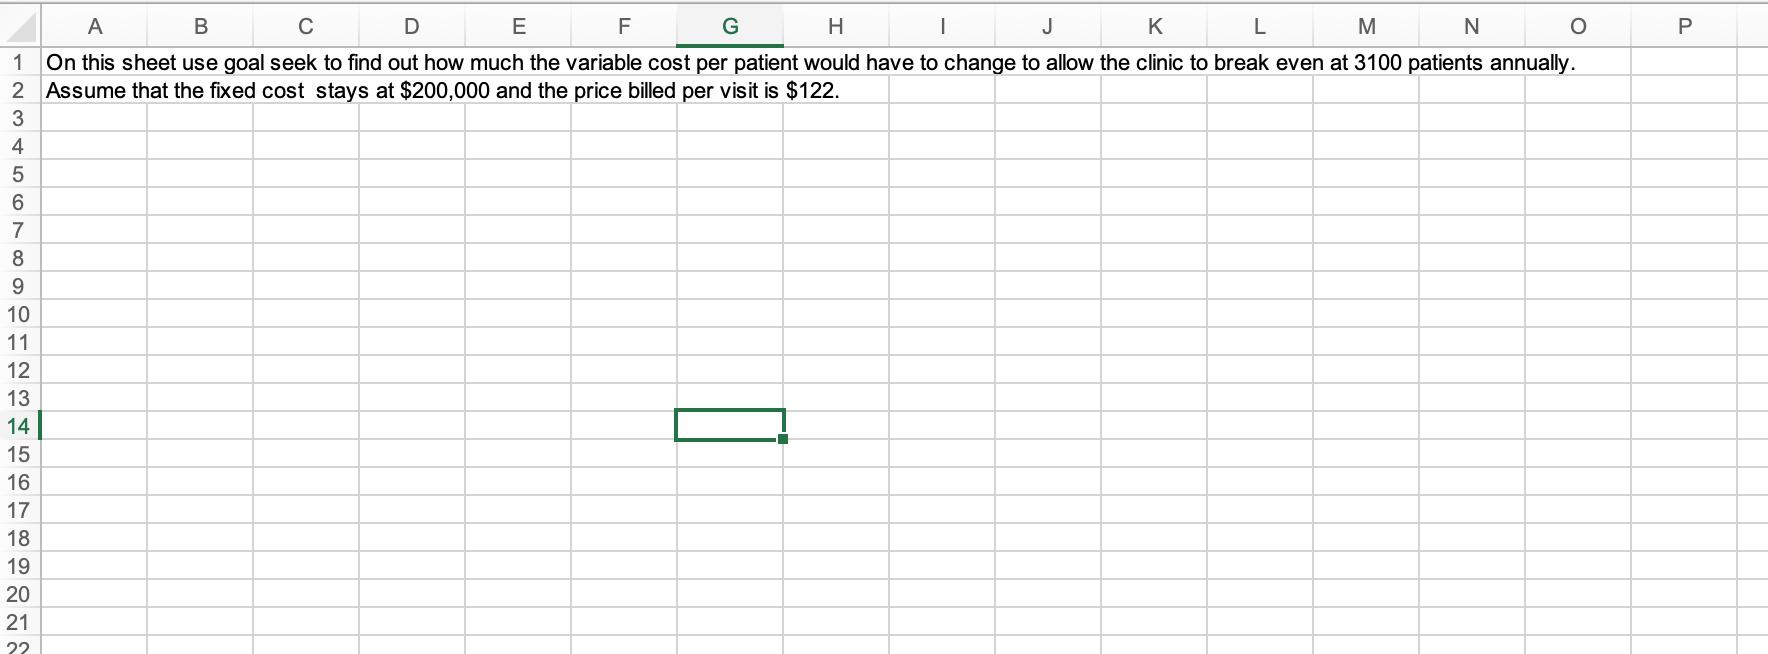 о P A B с D E F G H Н. J K M N 1 On this sheet use goal seek to find out how much the variable cost per patient would have to